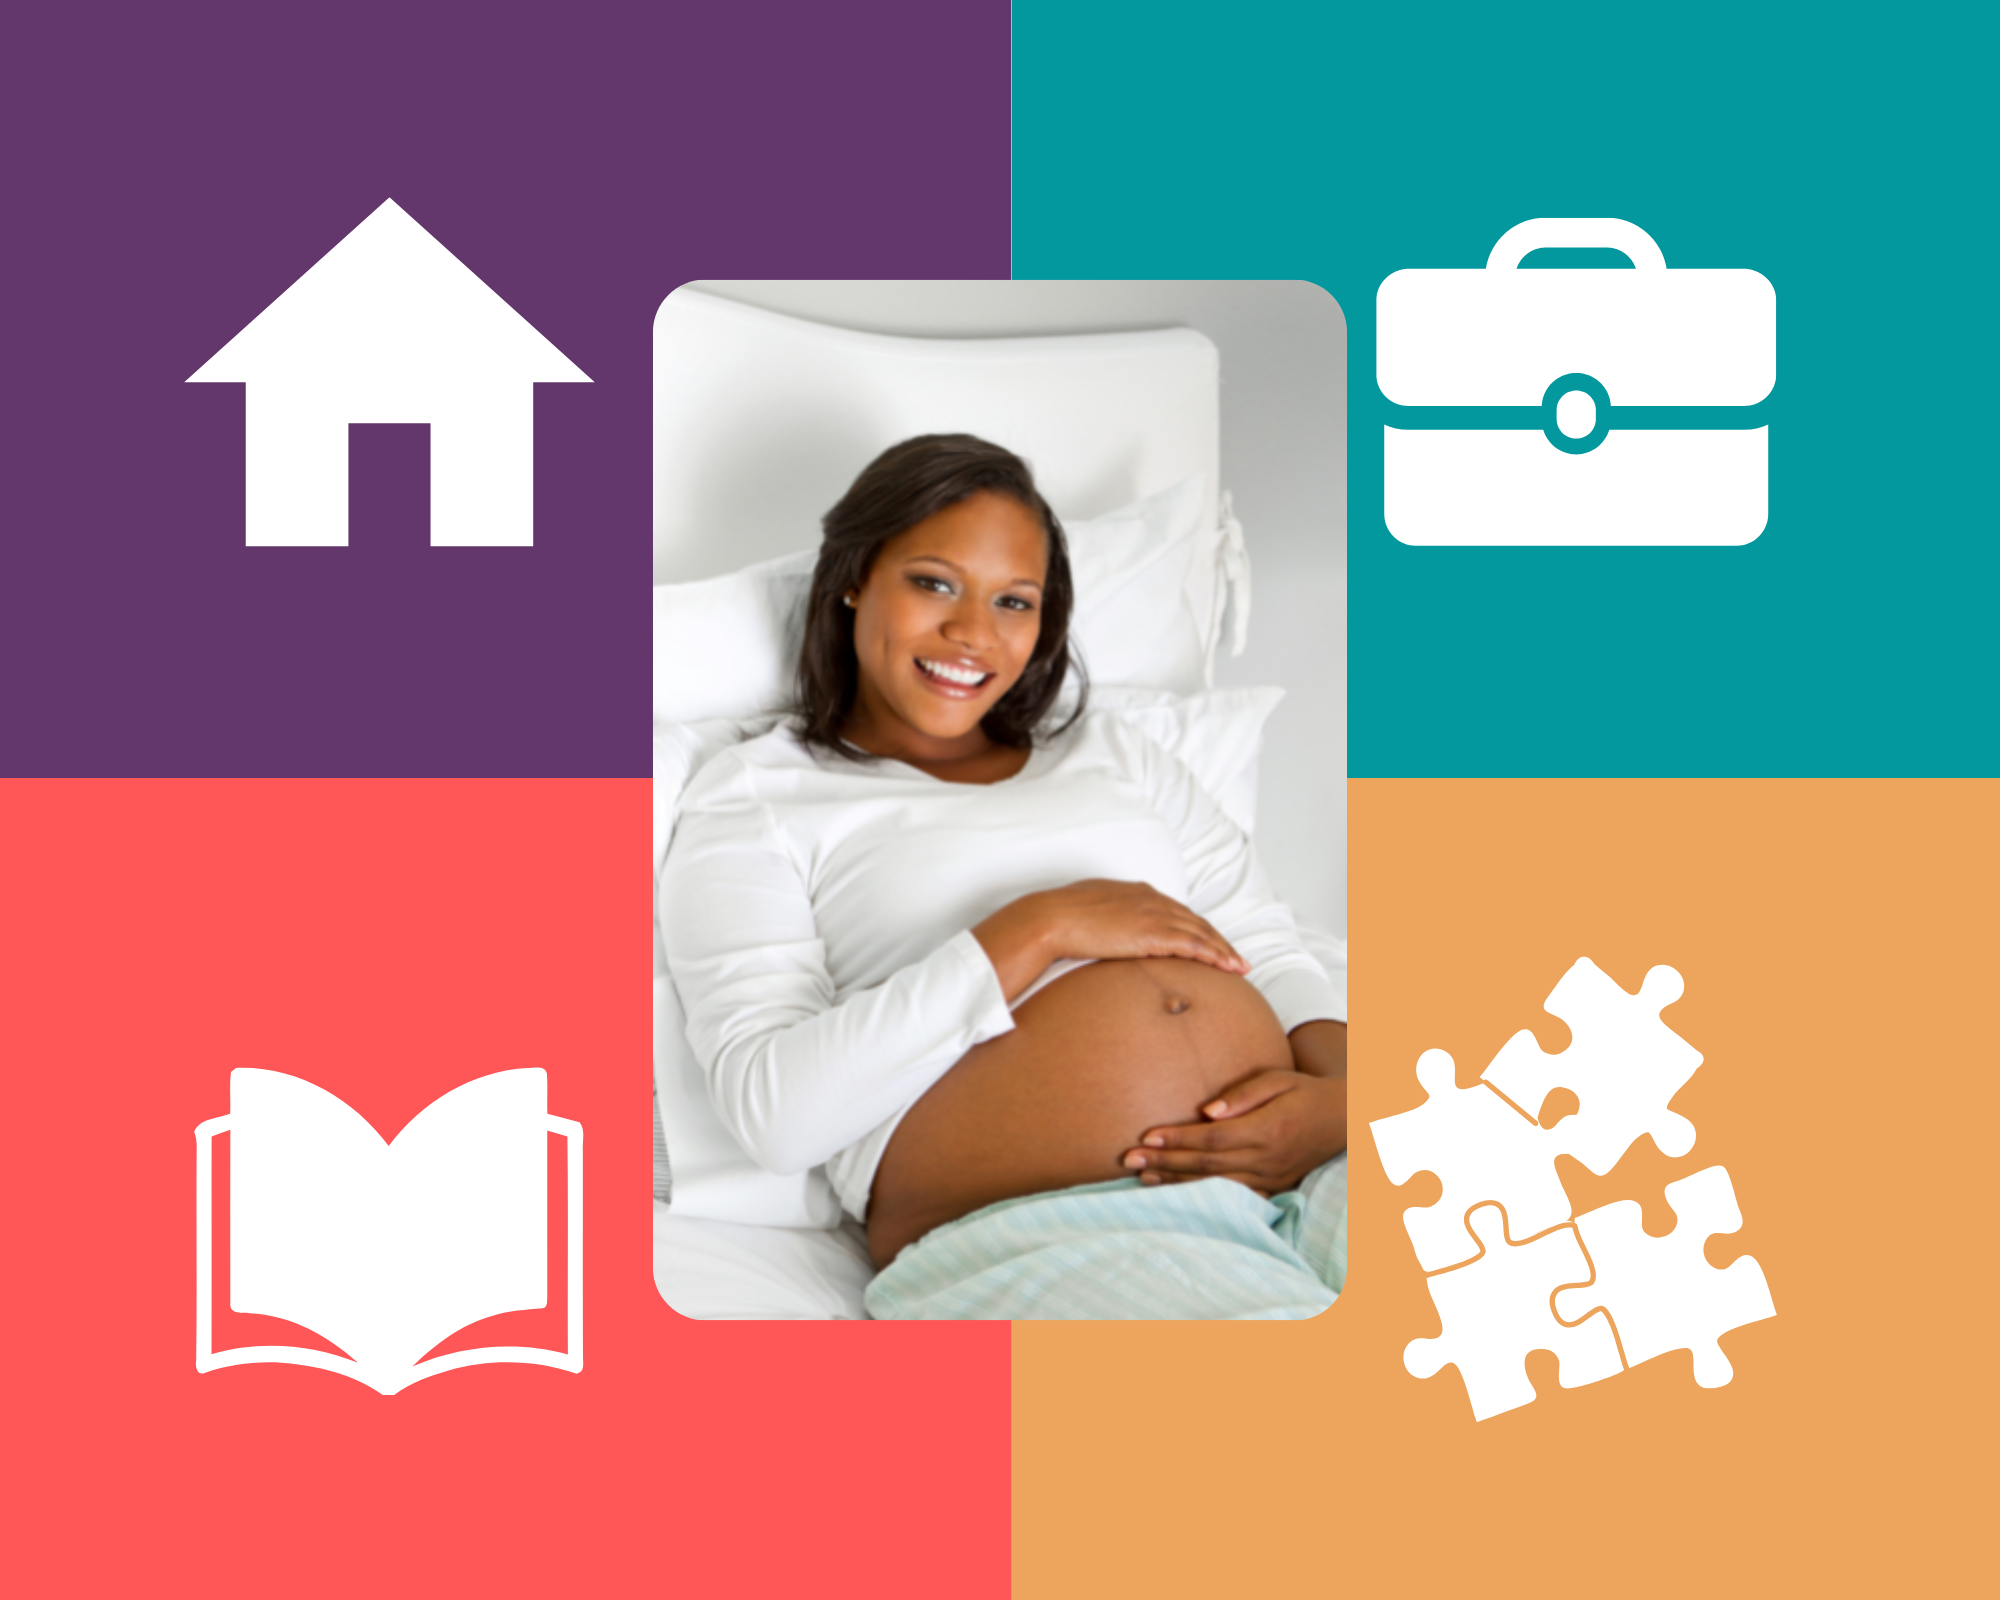 Pregnant woman surrounded by a house, briefcase, book, and puzzle. Symbolizes social determinants of health, or the places where we live, work, learn, and play.